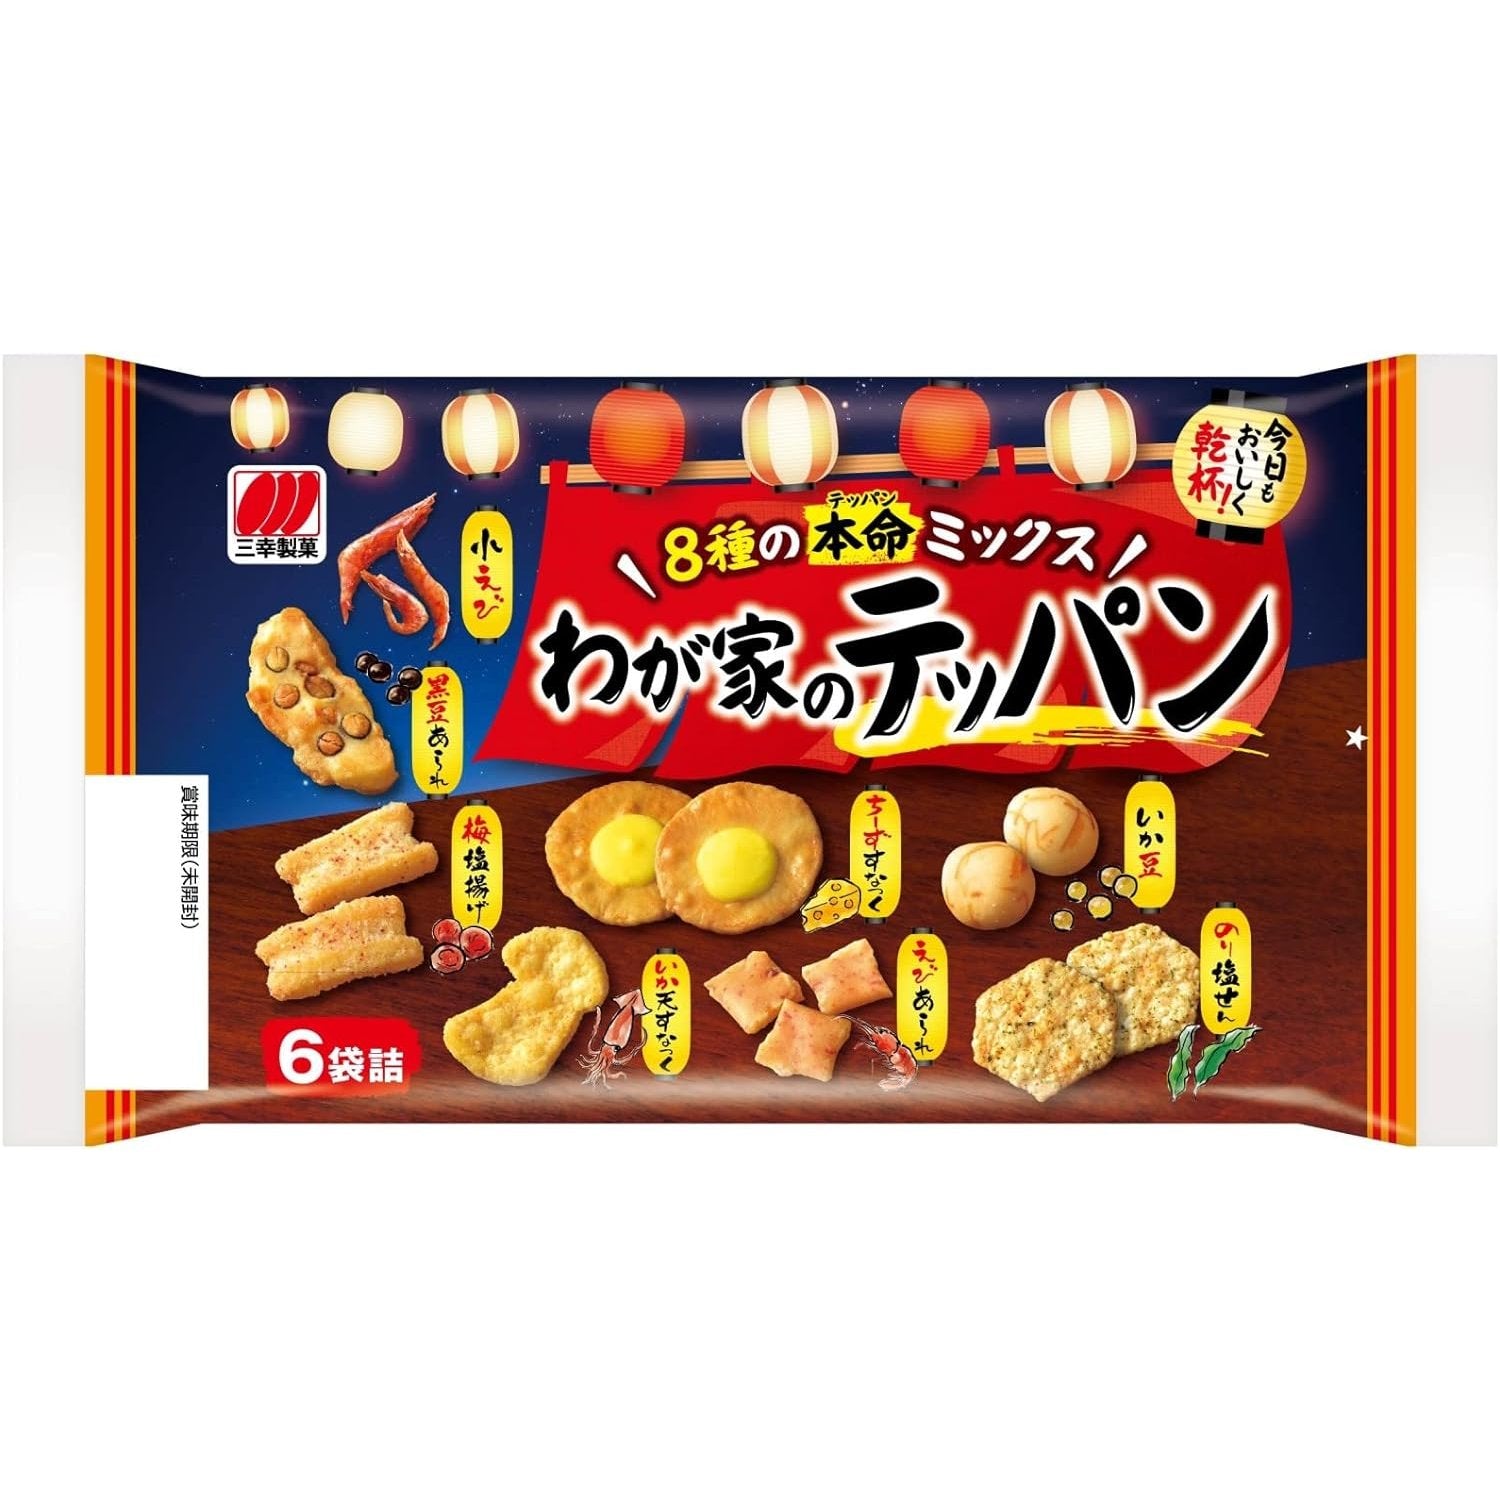 Sanko Mixed Rice Crackers 7 Japanese Flavors Assortment Pack 110g